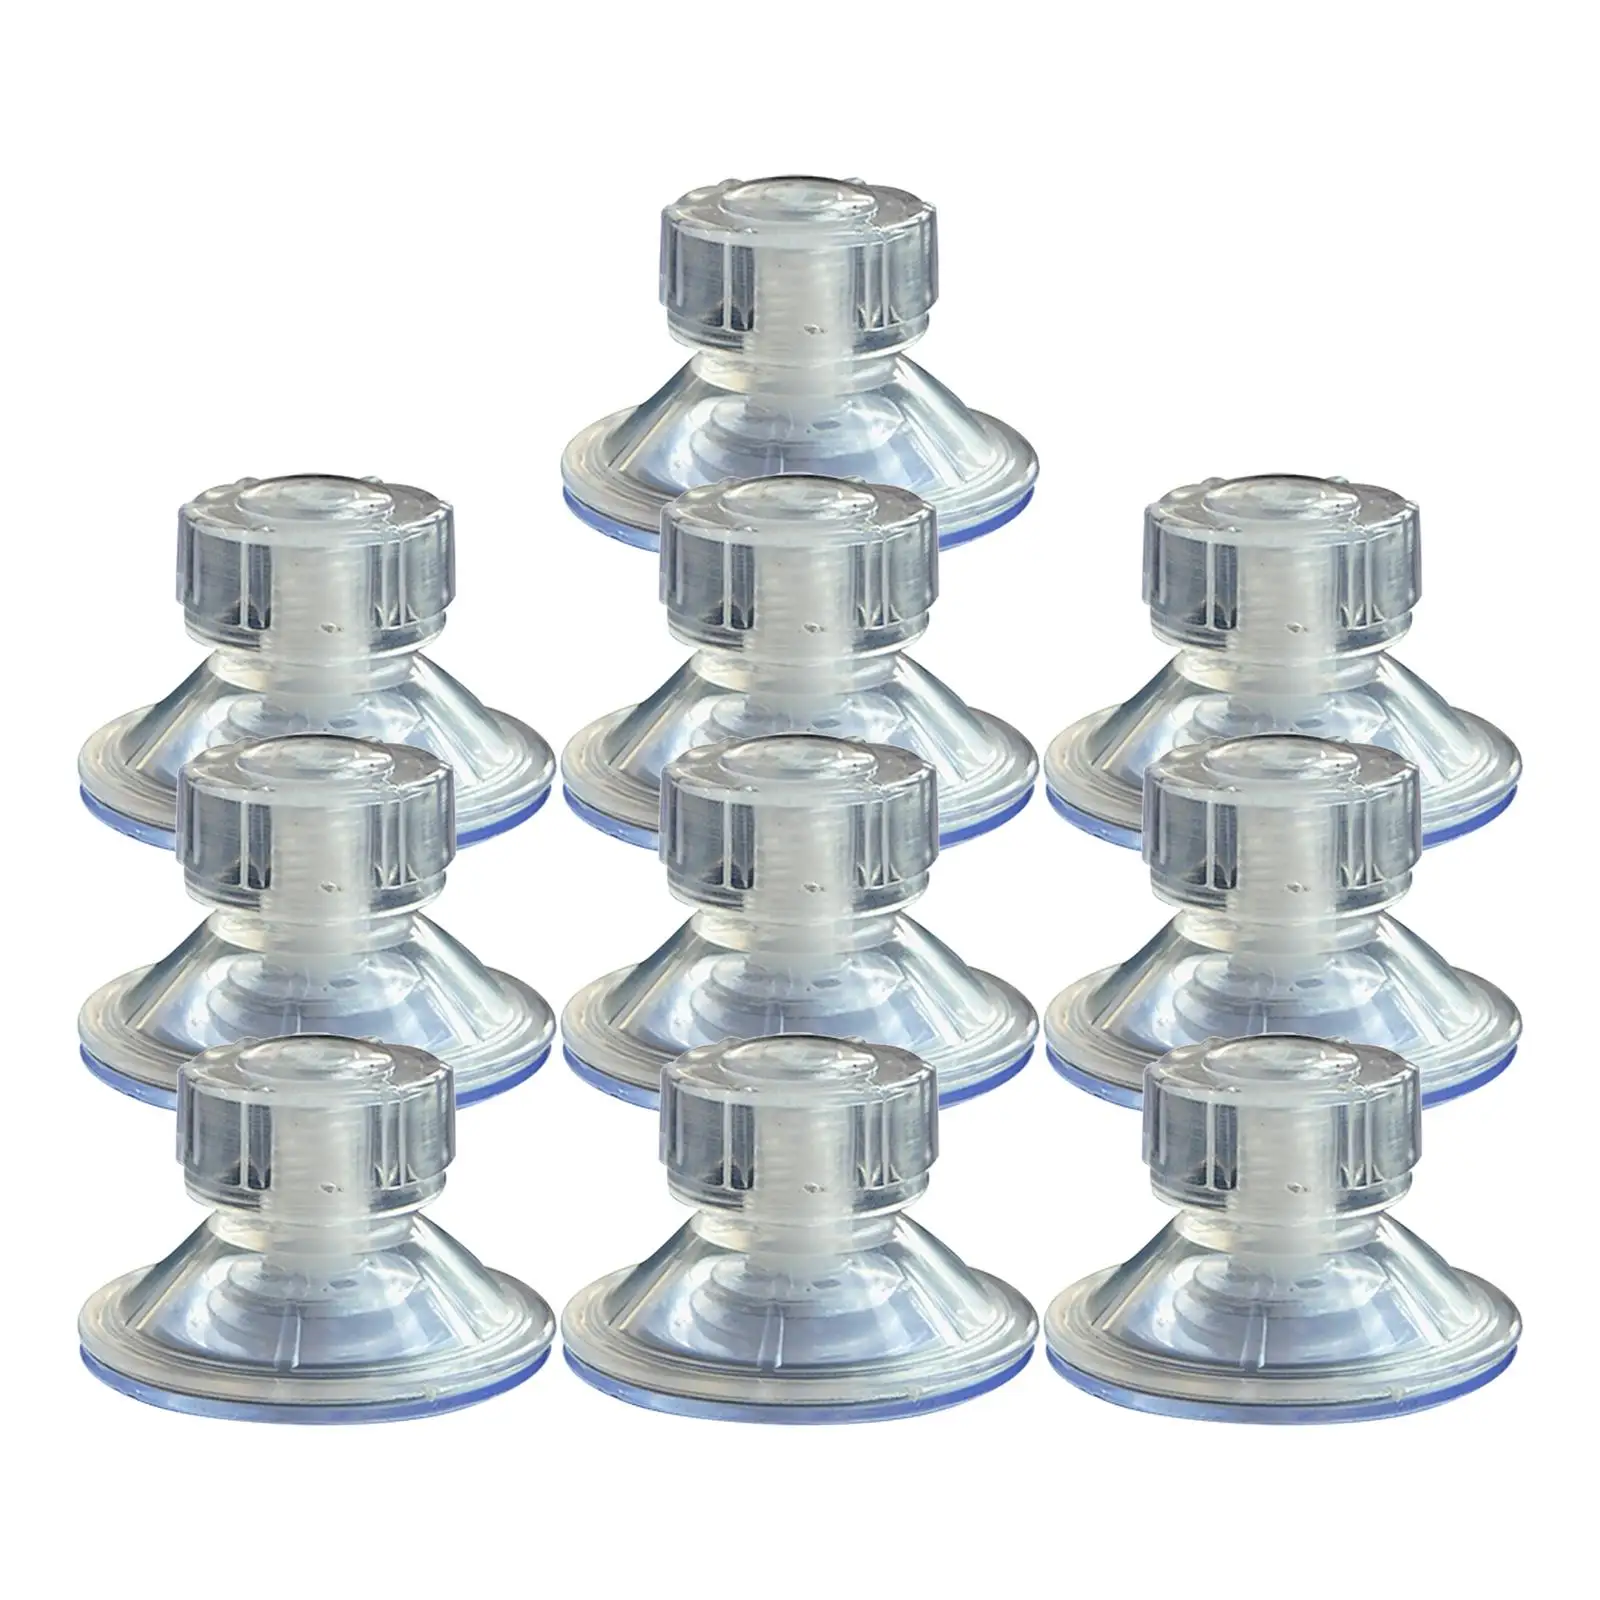 10 Pieces Car Awning Suction Cup Anchor Heavy Duty for Caravan Motorhome